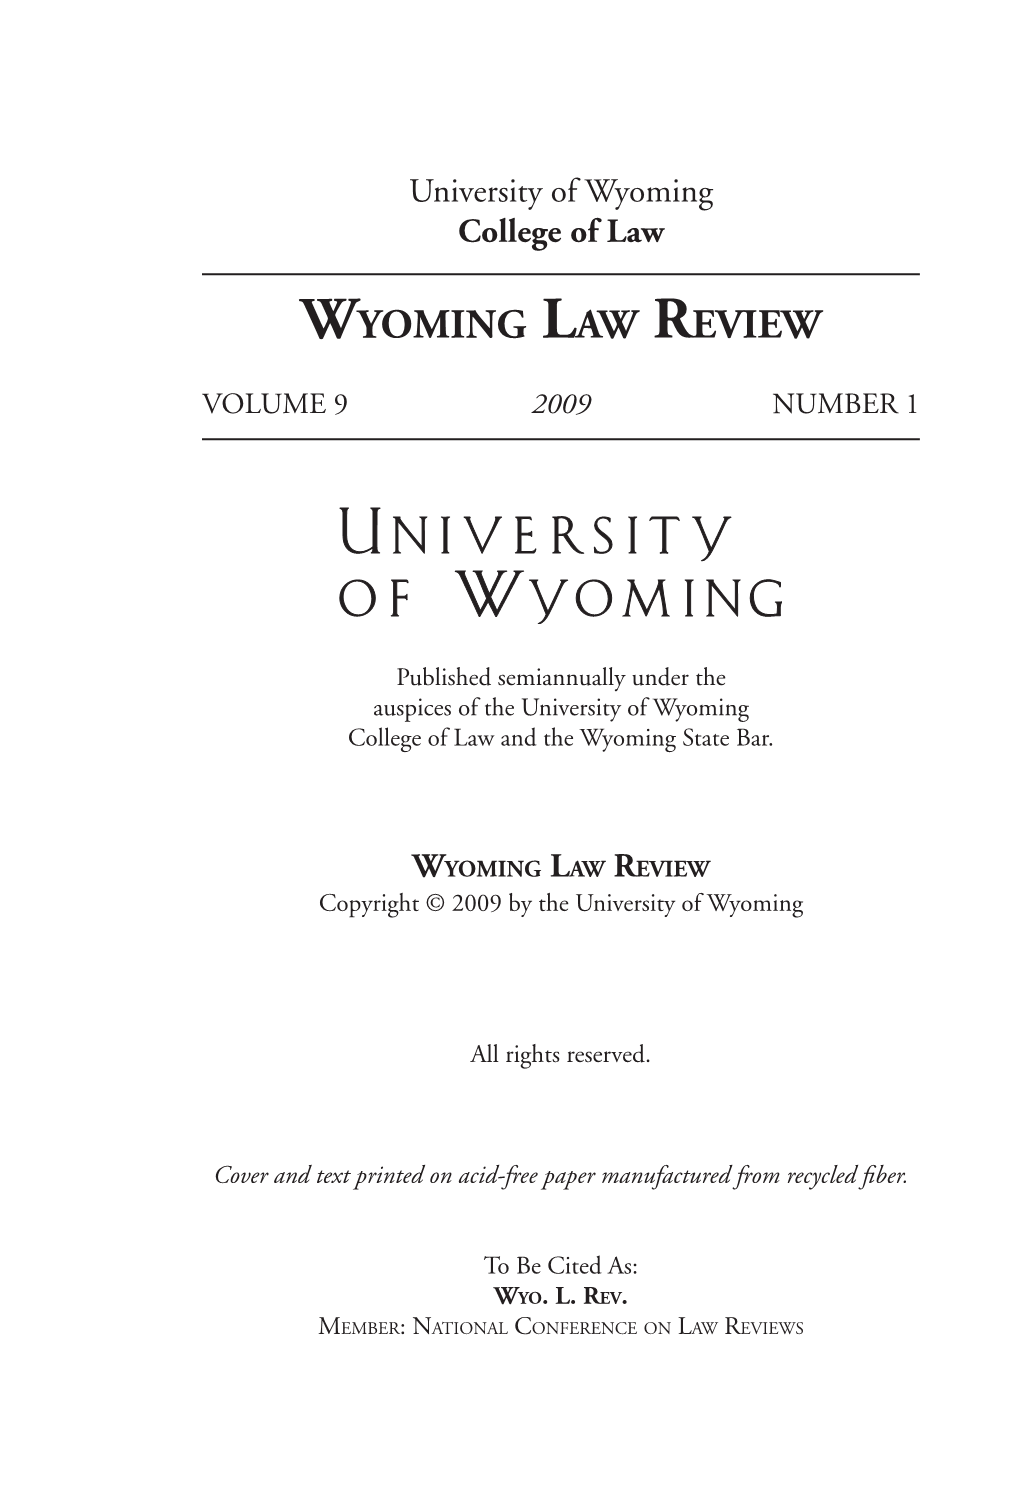 Wuomivg LAW REVIEW